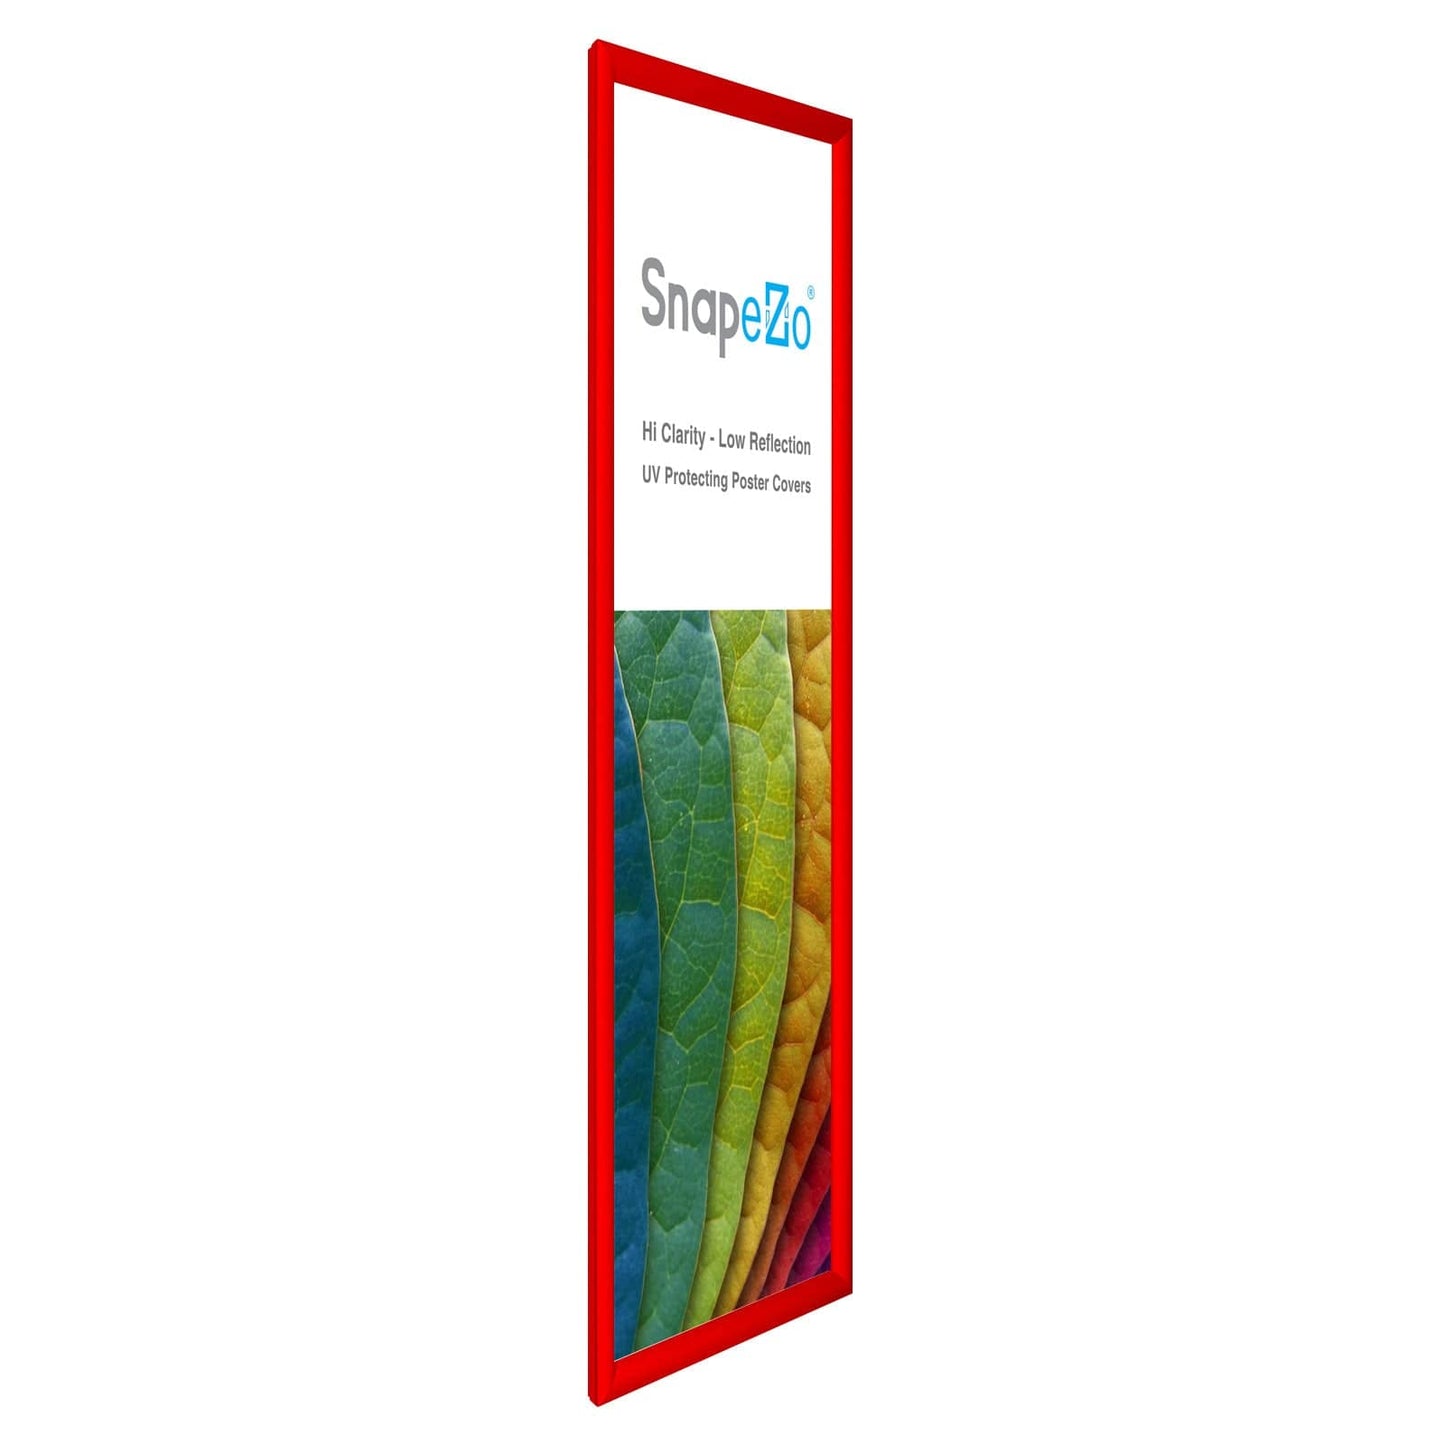 10x32 Red SnapeZo® Snap Frame - 1.2" Profile - Snap Frames Direct